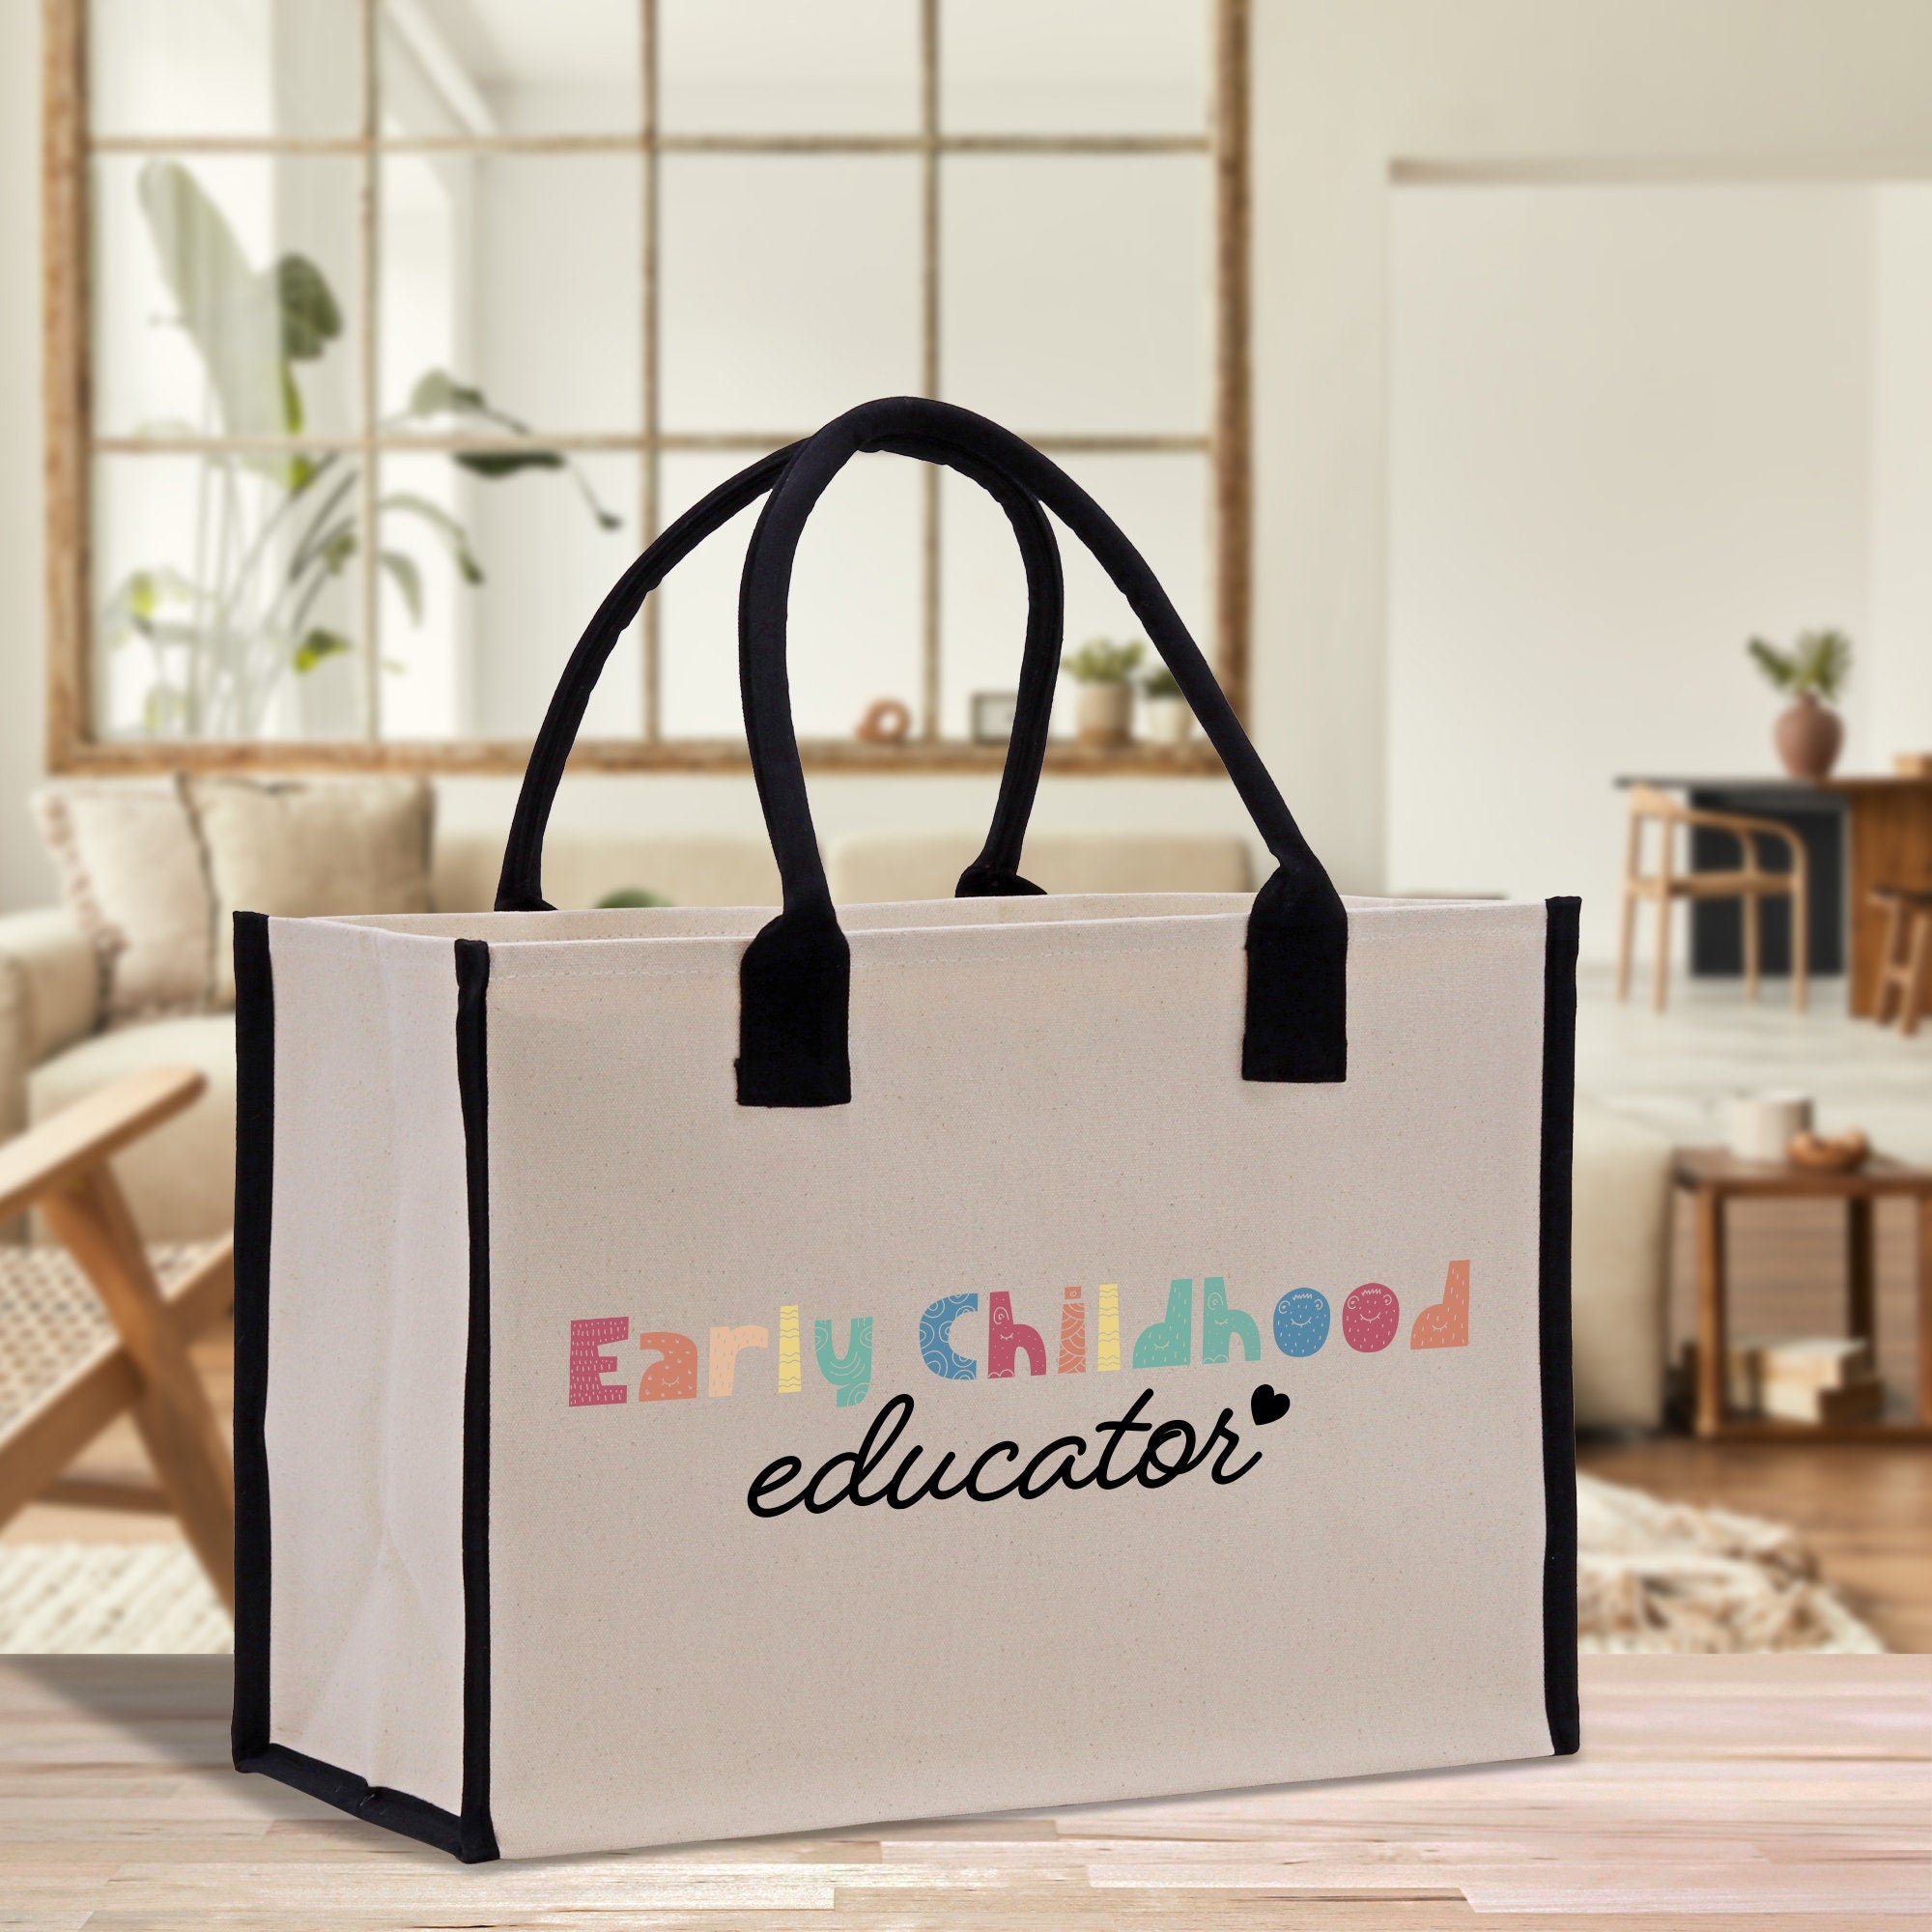 a bag with the words early childhood education printed on it